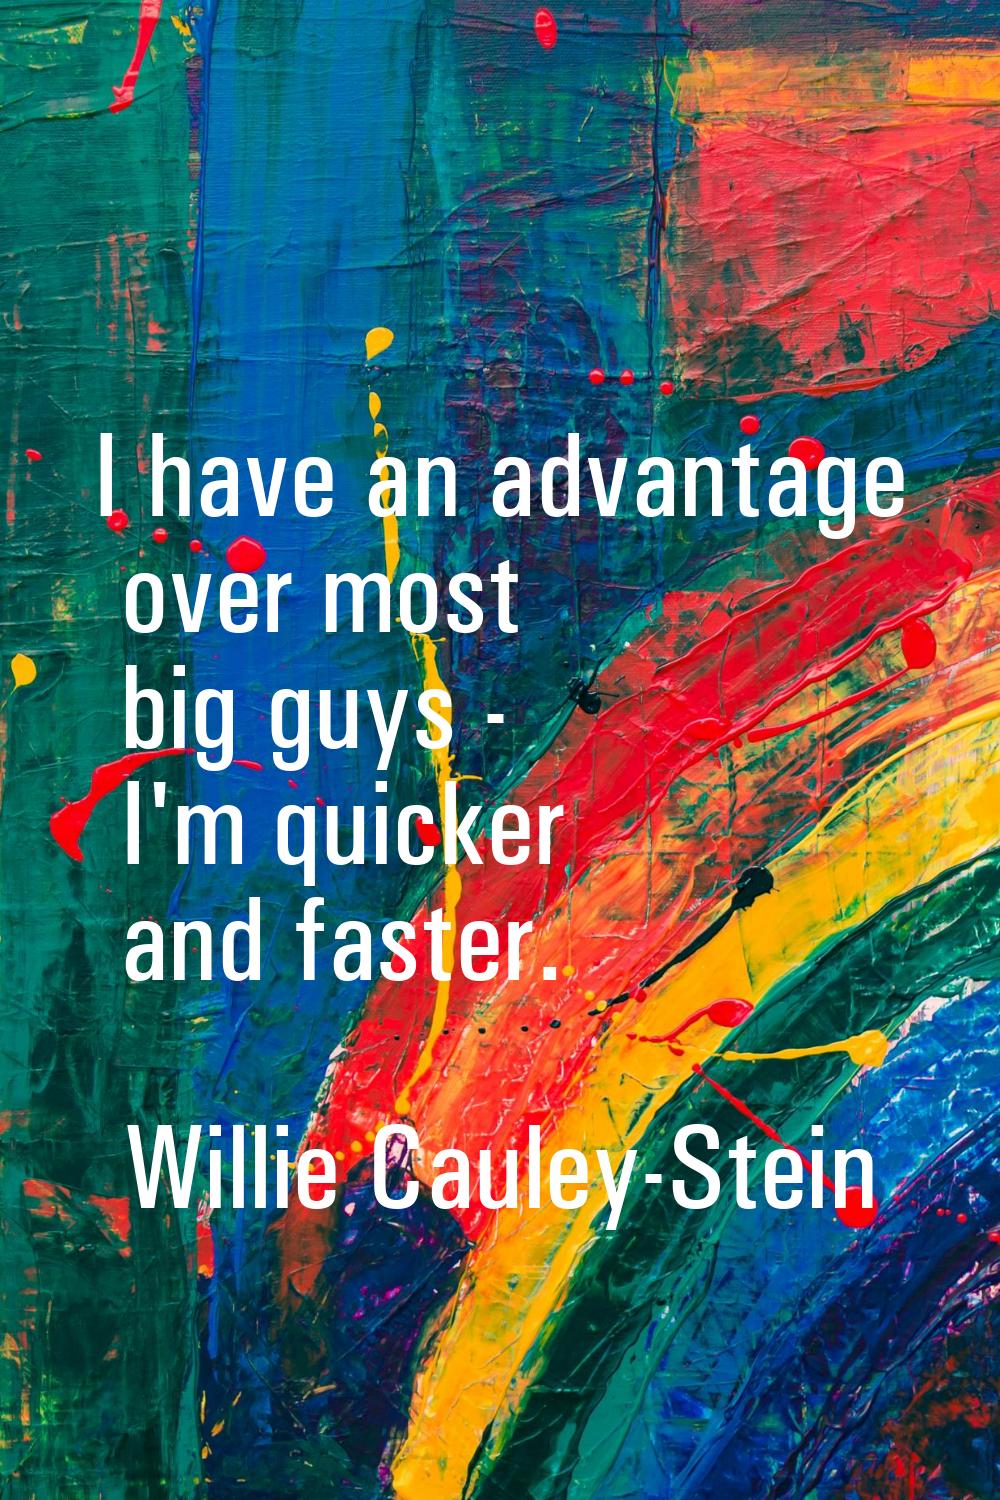 I have an advantage over most big guys - I'm quicker and faster.